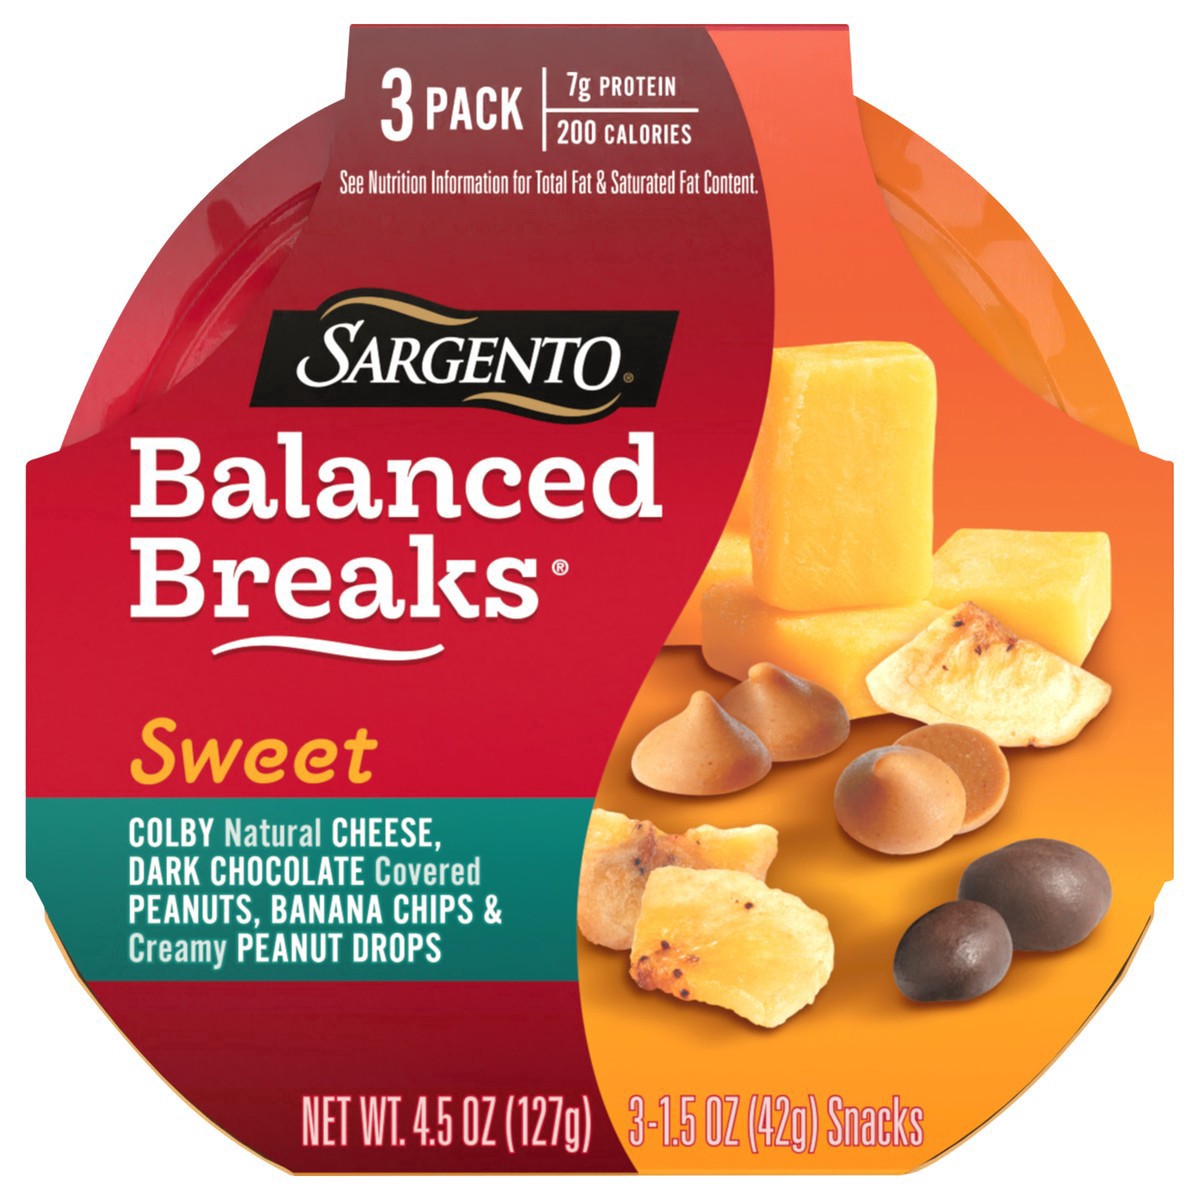 slide 12 of 17, Sargento Sweet Balanced Breaks with Colby Natural Cheese, Dark Chocolate Covered Peanuts, Banana Chips and Creamy Peanut Drops, 1.5 oz., 3-Pack, 4.5 oz